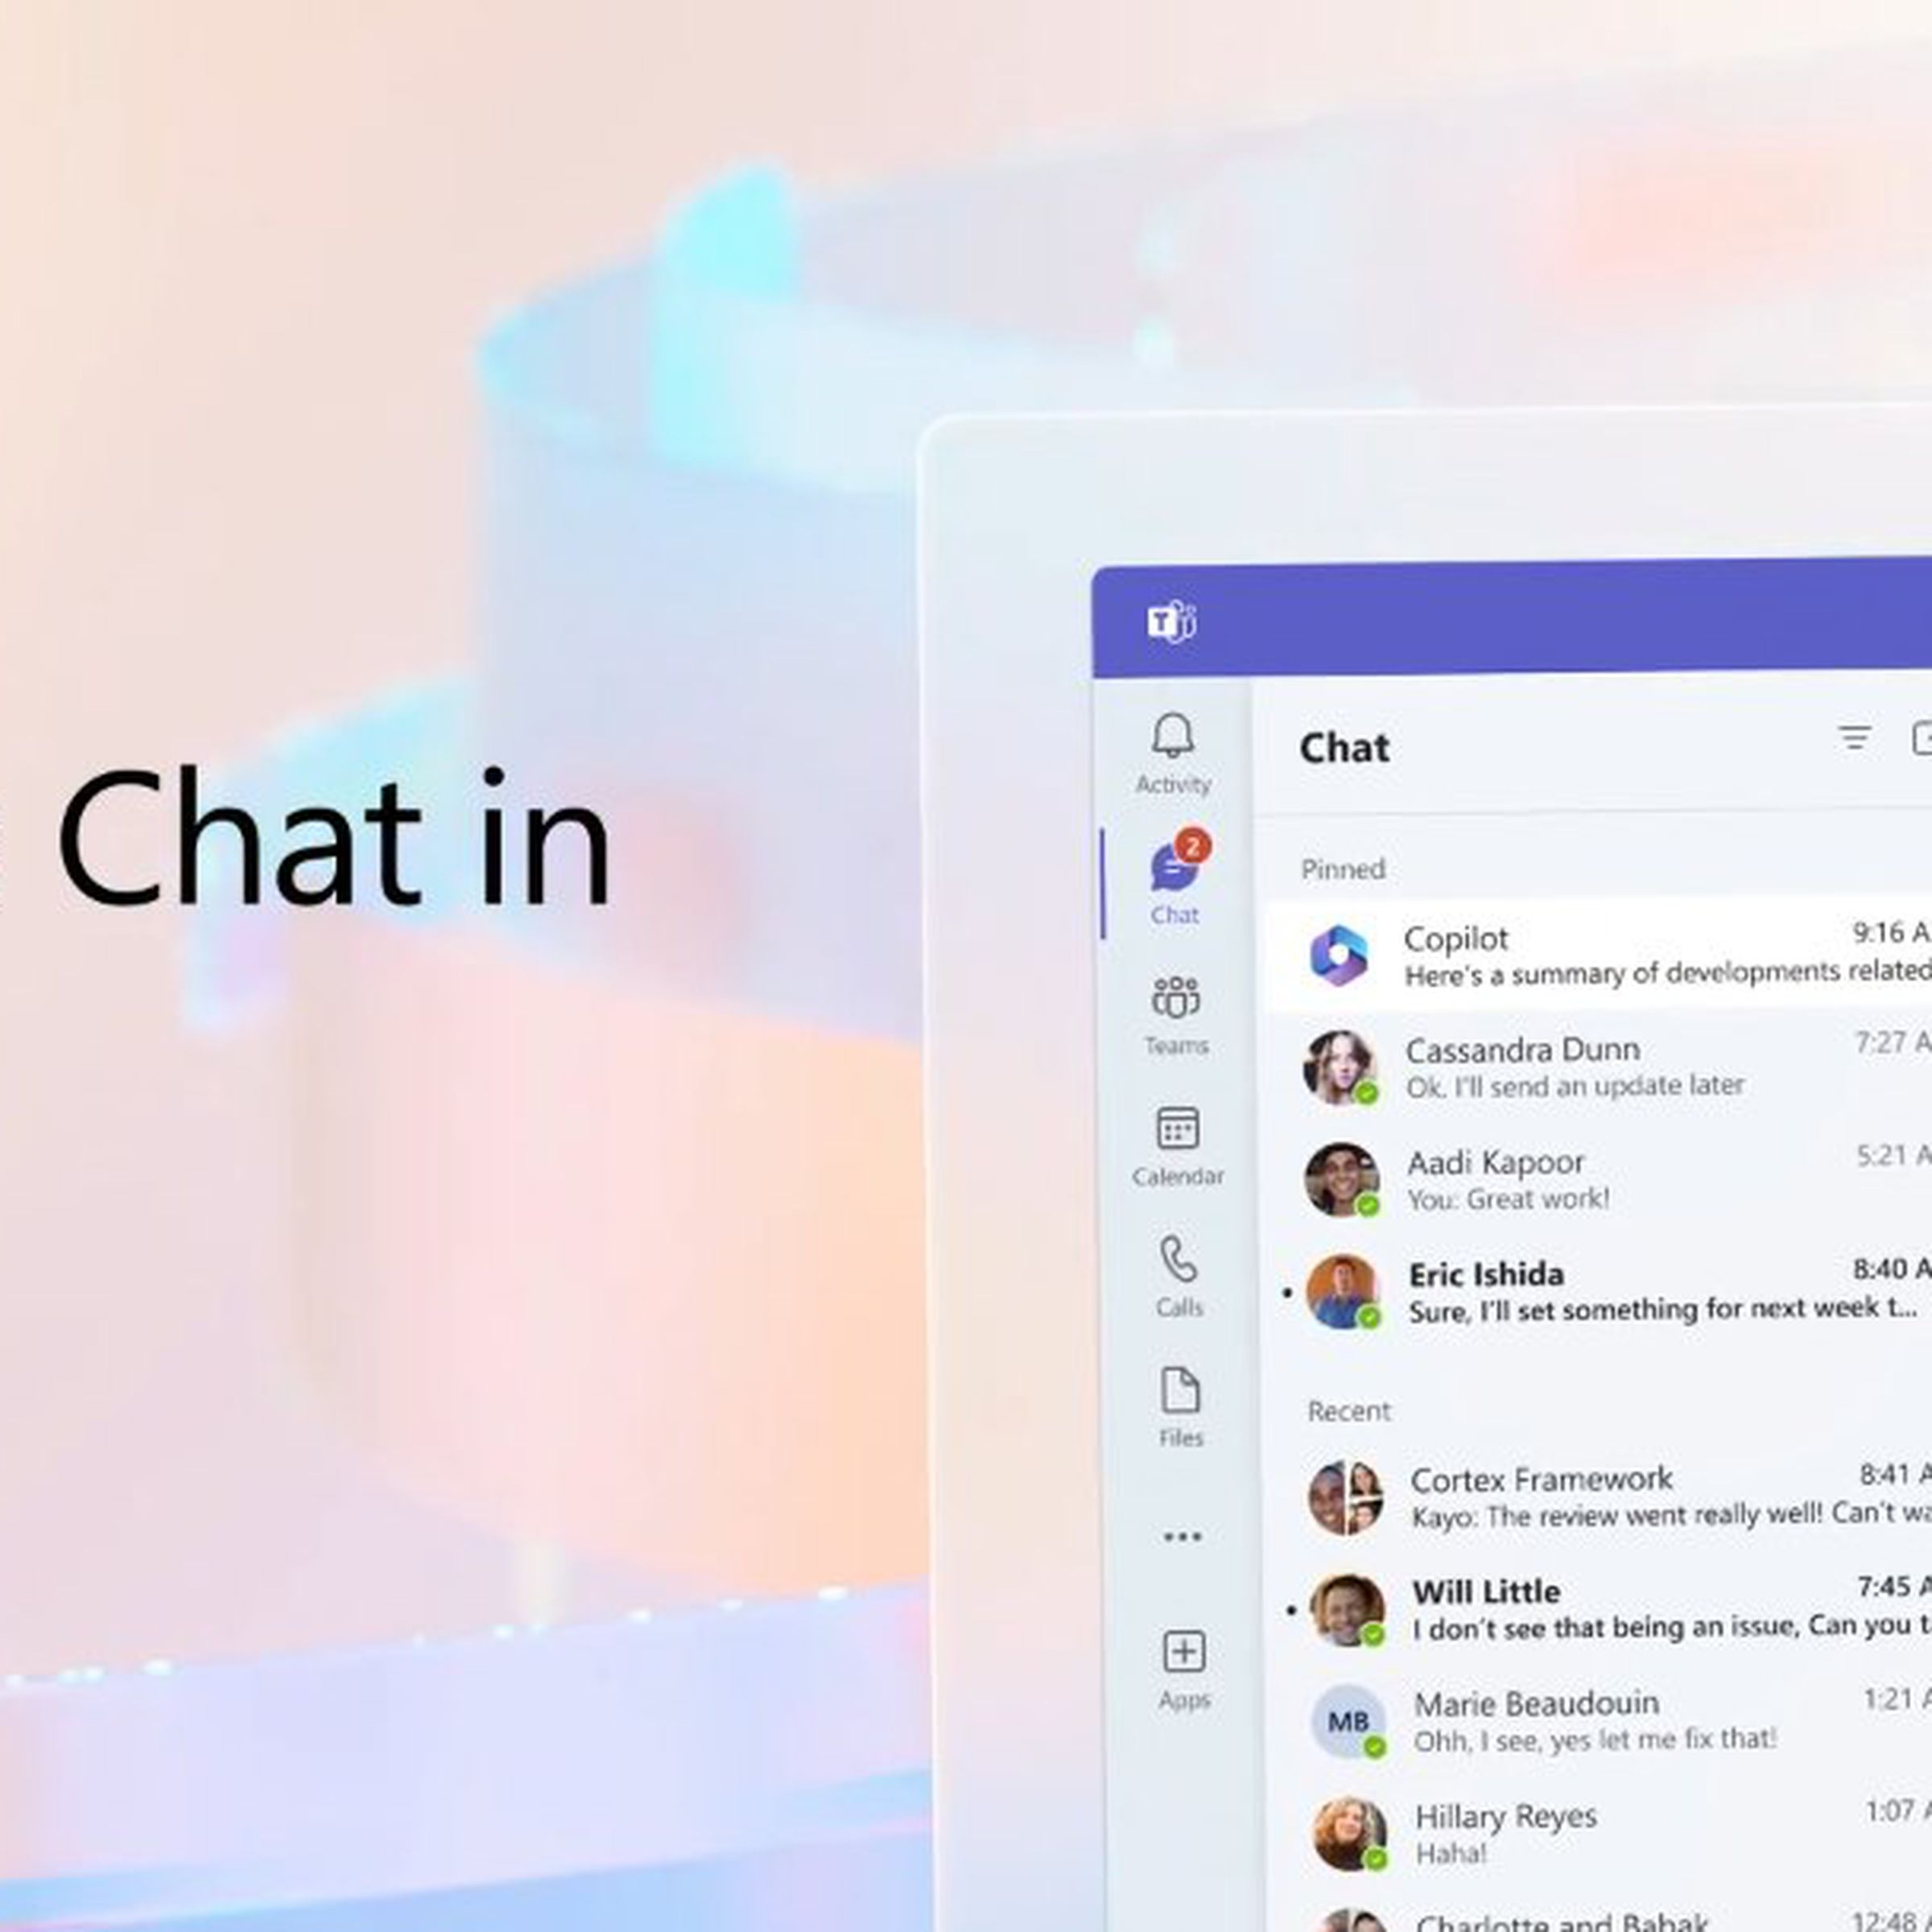 A slide introducing Microsoft’s Business Chat AI assistant, showing the chatbot interface that can be queried to produce summaries and more.